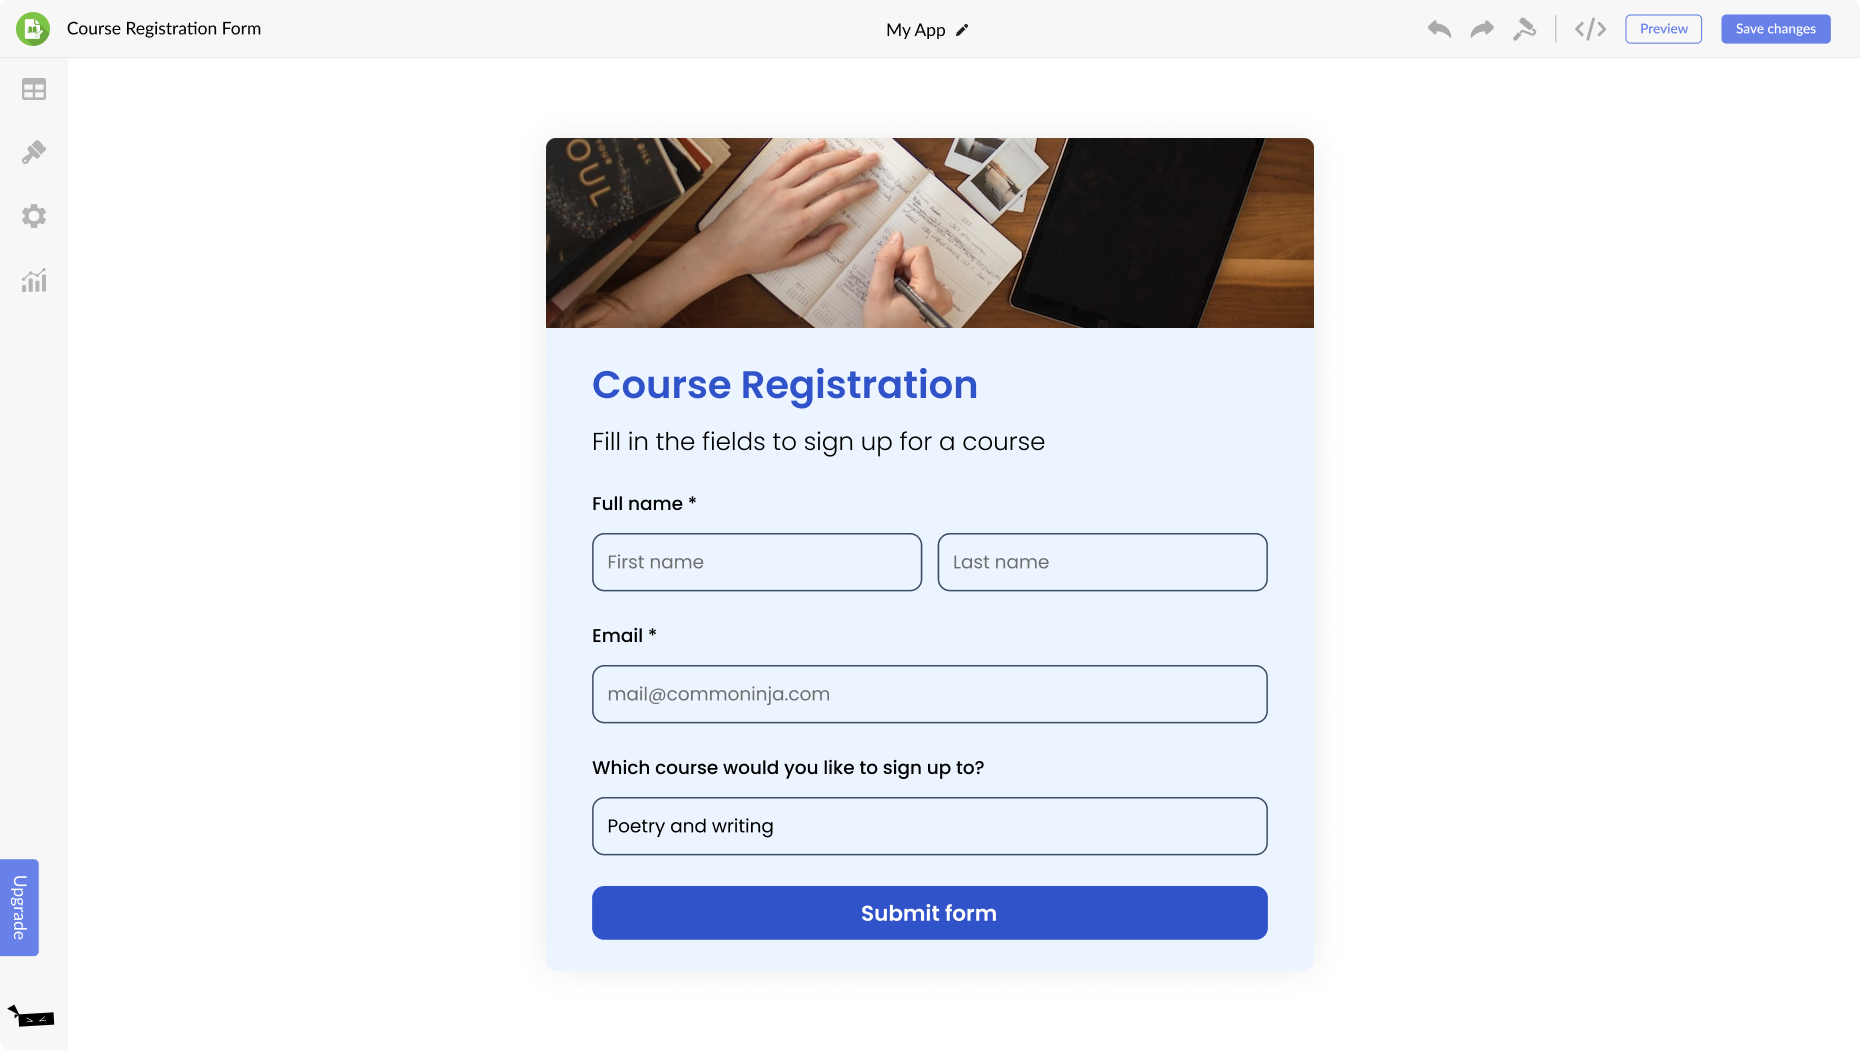 Course Registration Form for RubberDuck